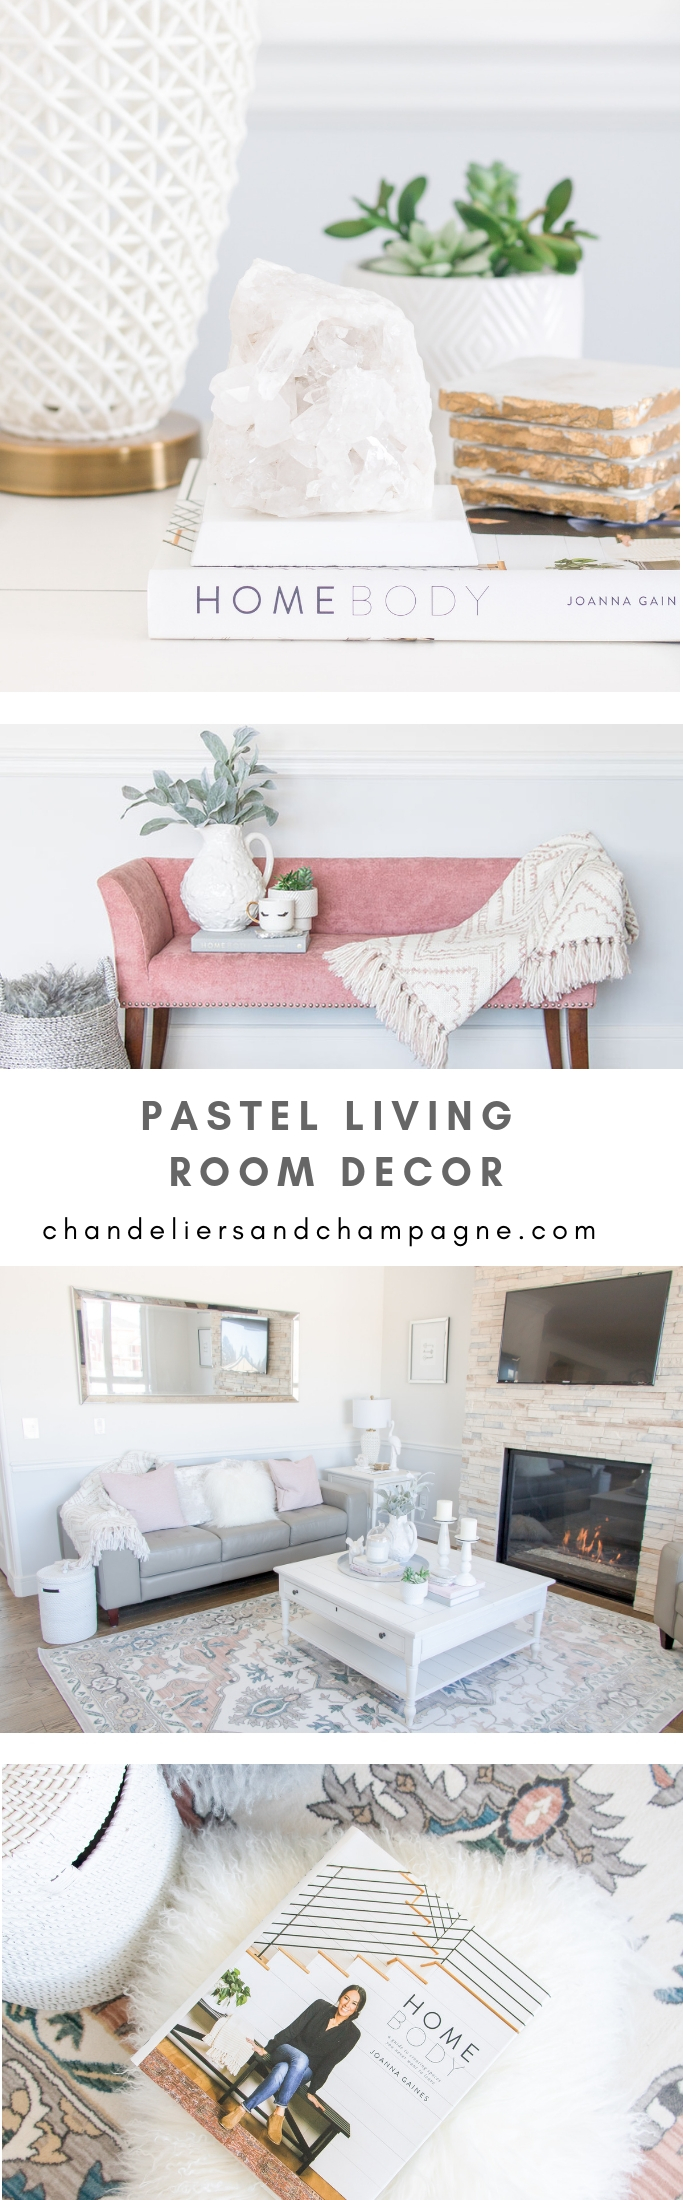 Pastel Living Room Decor for Spring - light and airy living room with blush pink and white decorative accents